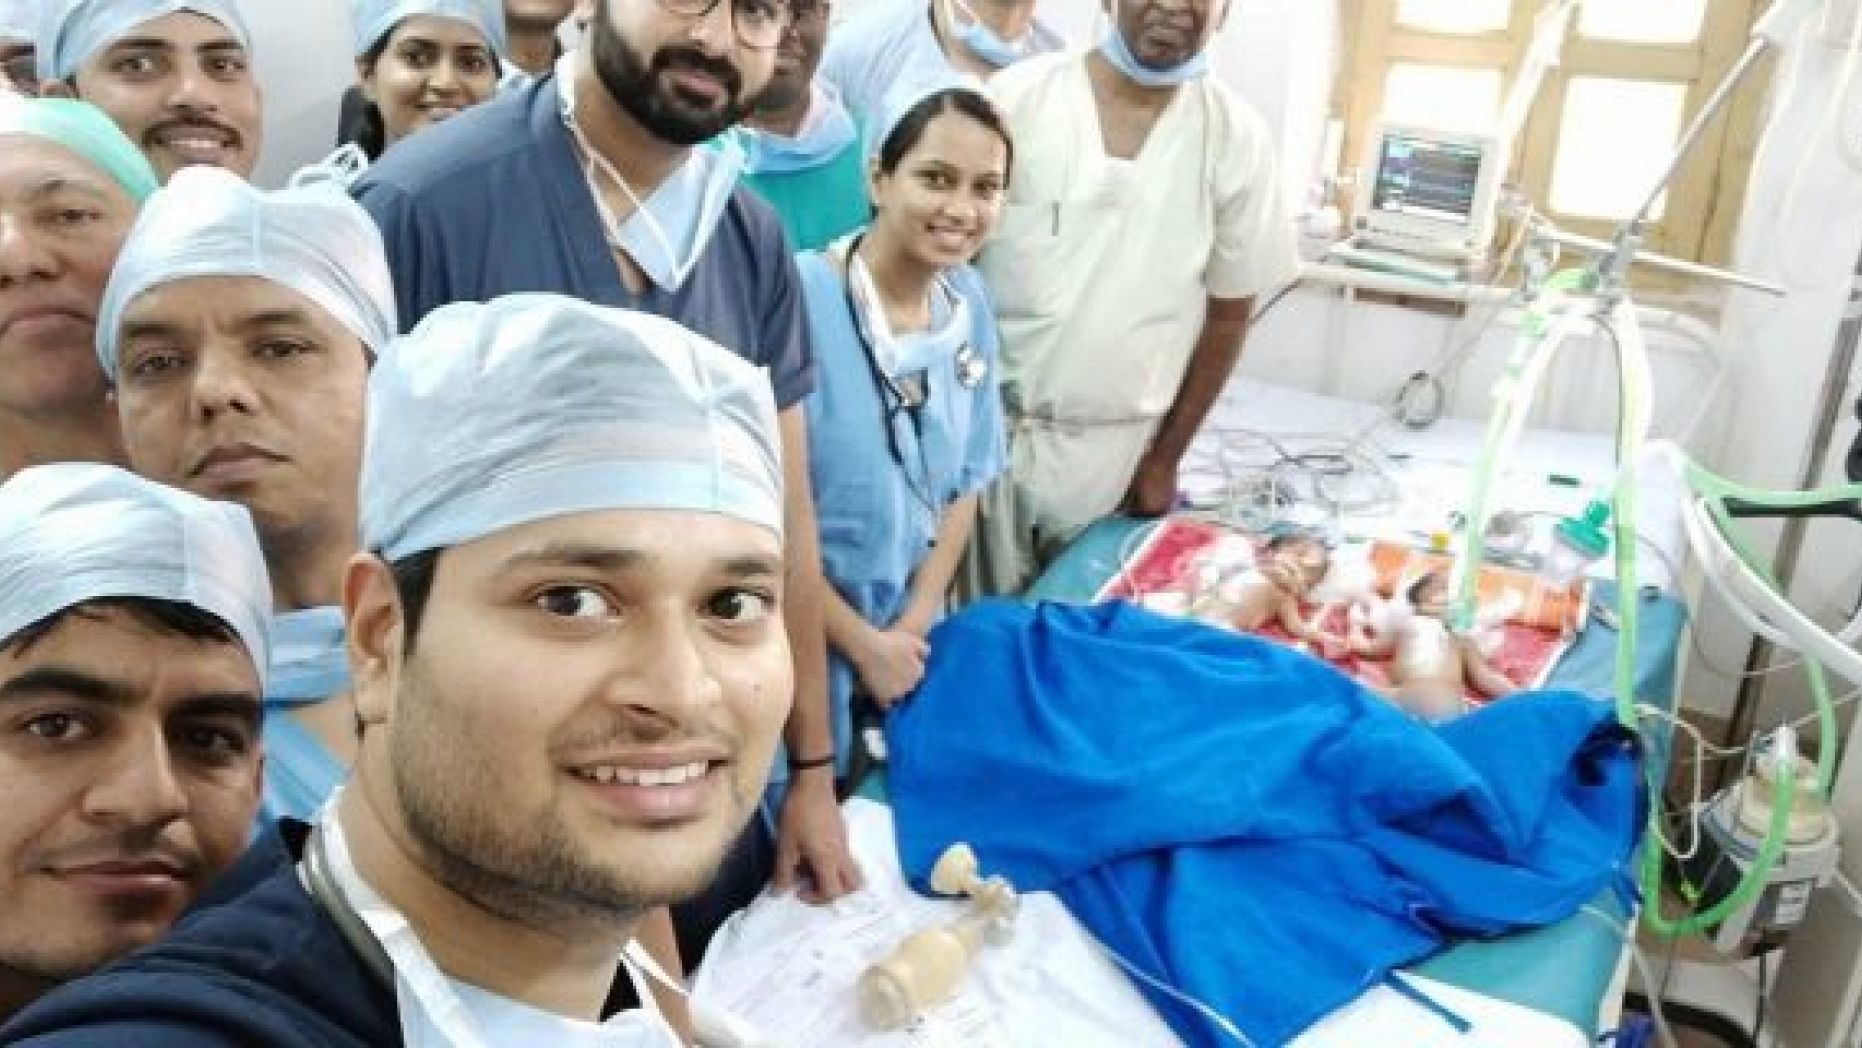 The team of gifted surgeons, pictured moments after successfully separating the twins, performed the lifesaving operation free of charge. 